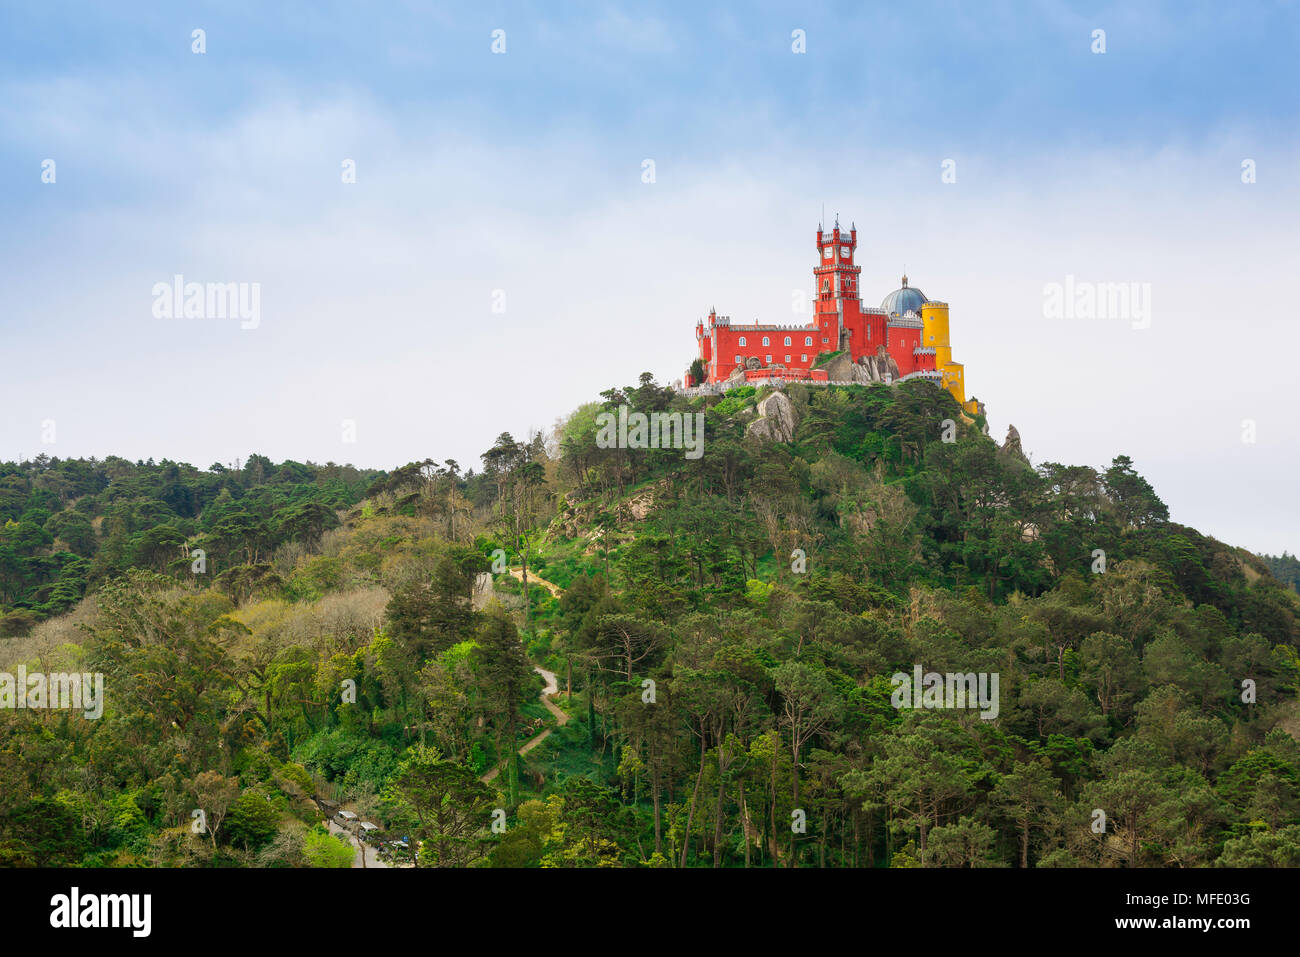 https://c8.alamy.com/comp/MFE03G/portugal-architecture-view-of-the-north-side-of-the-colorful-palacio-da-pena-sited-on-a-hill-near-the-town-of-sintra-portugal-MFE03G.jpg